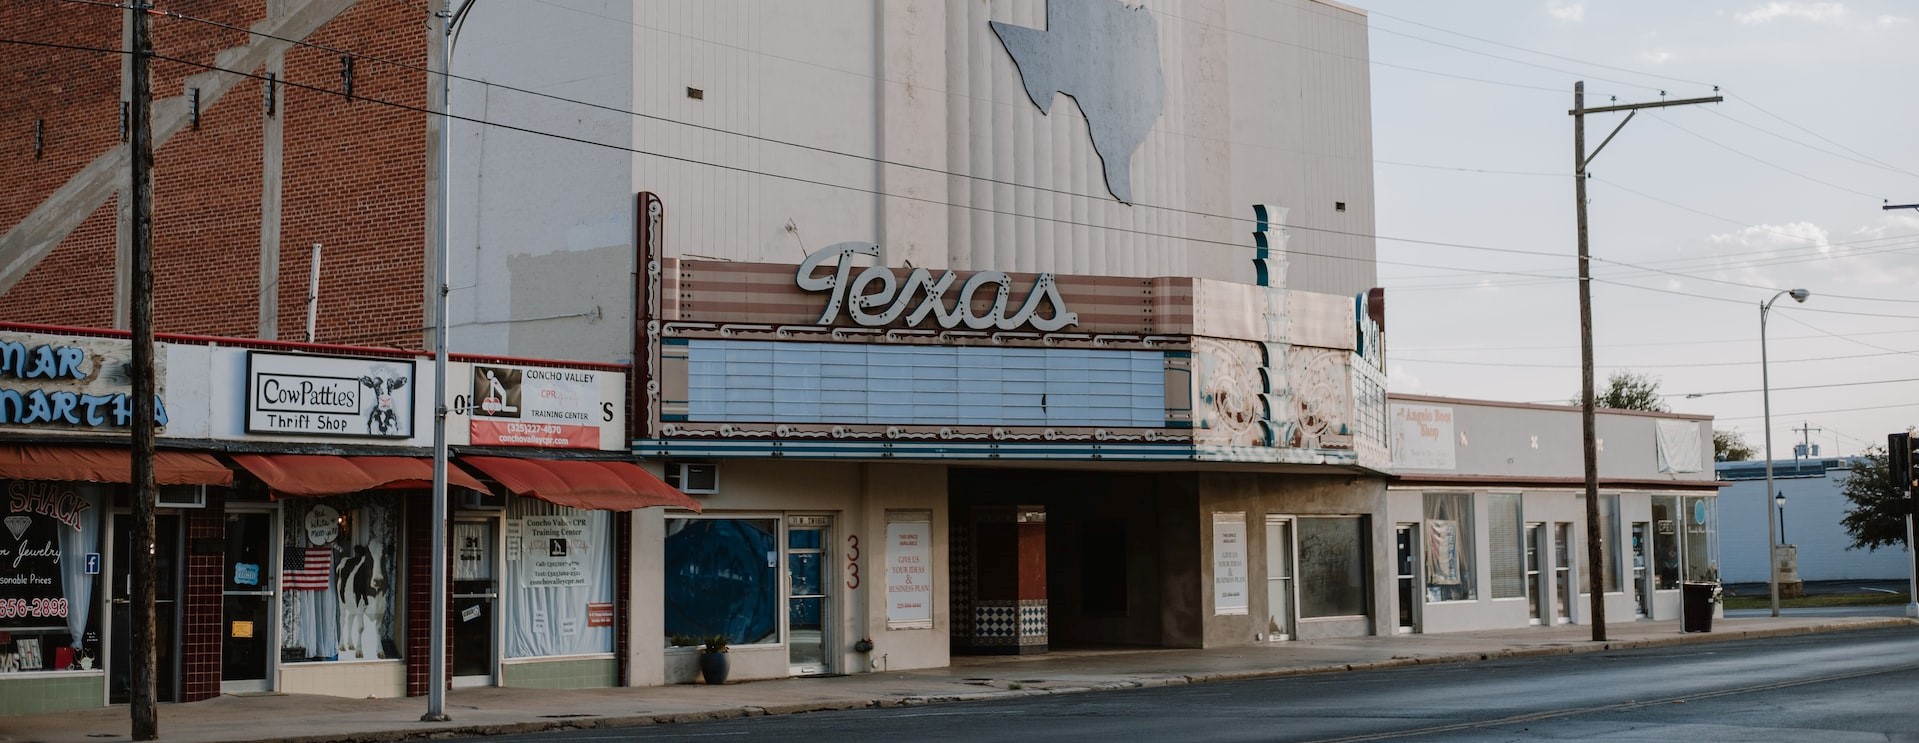 Texas Theater | Kids Car Donations